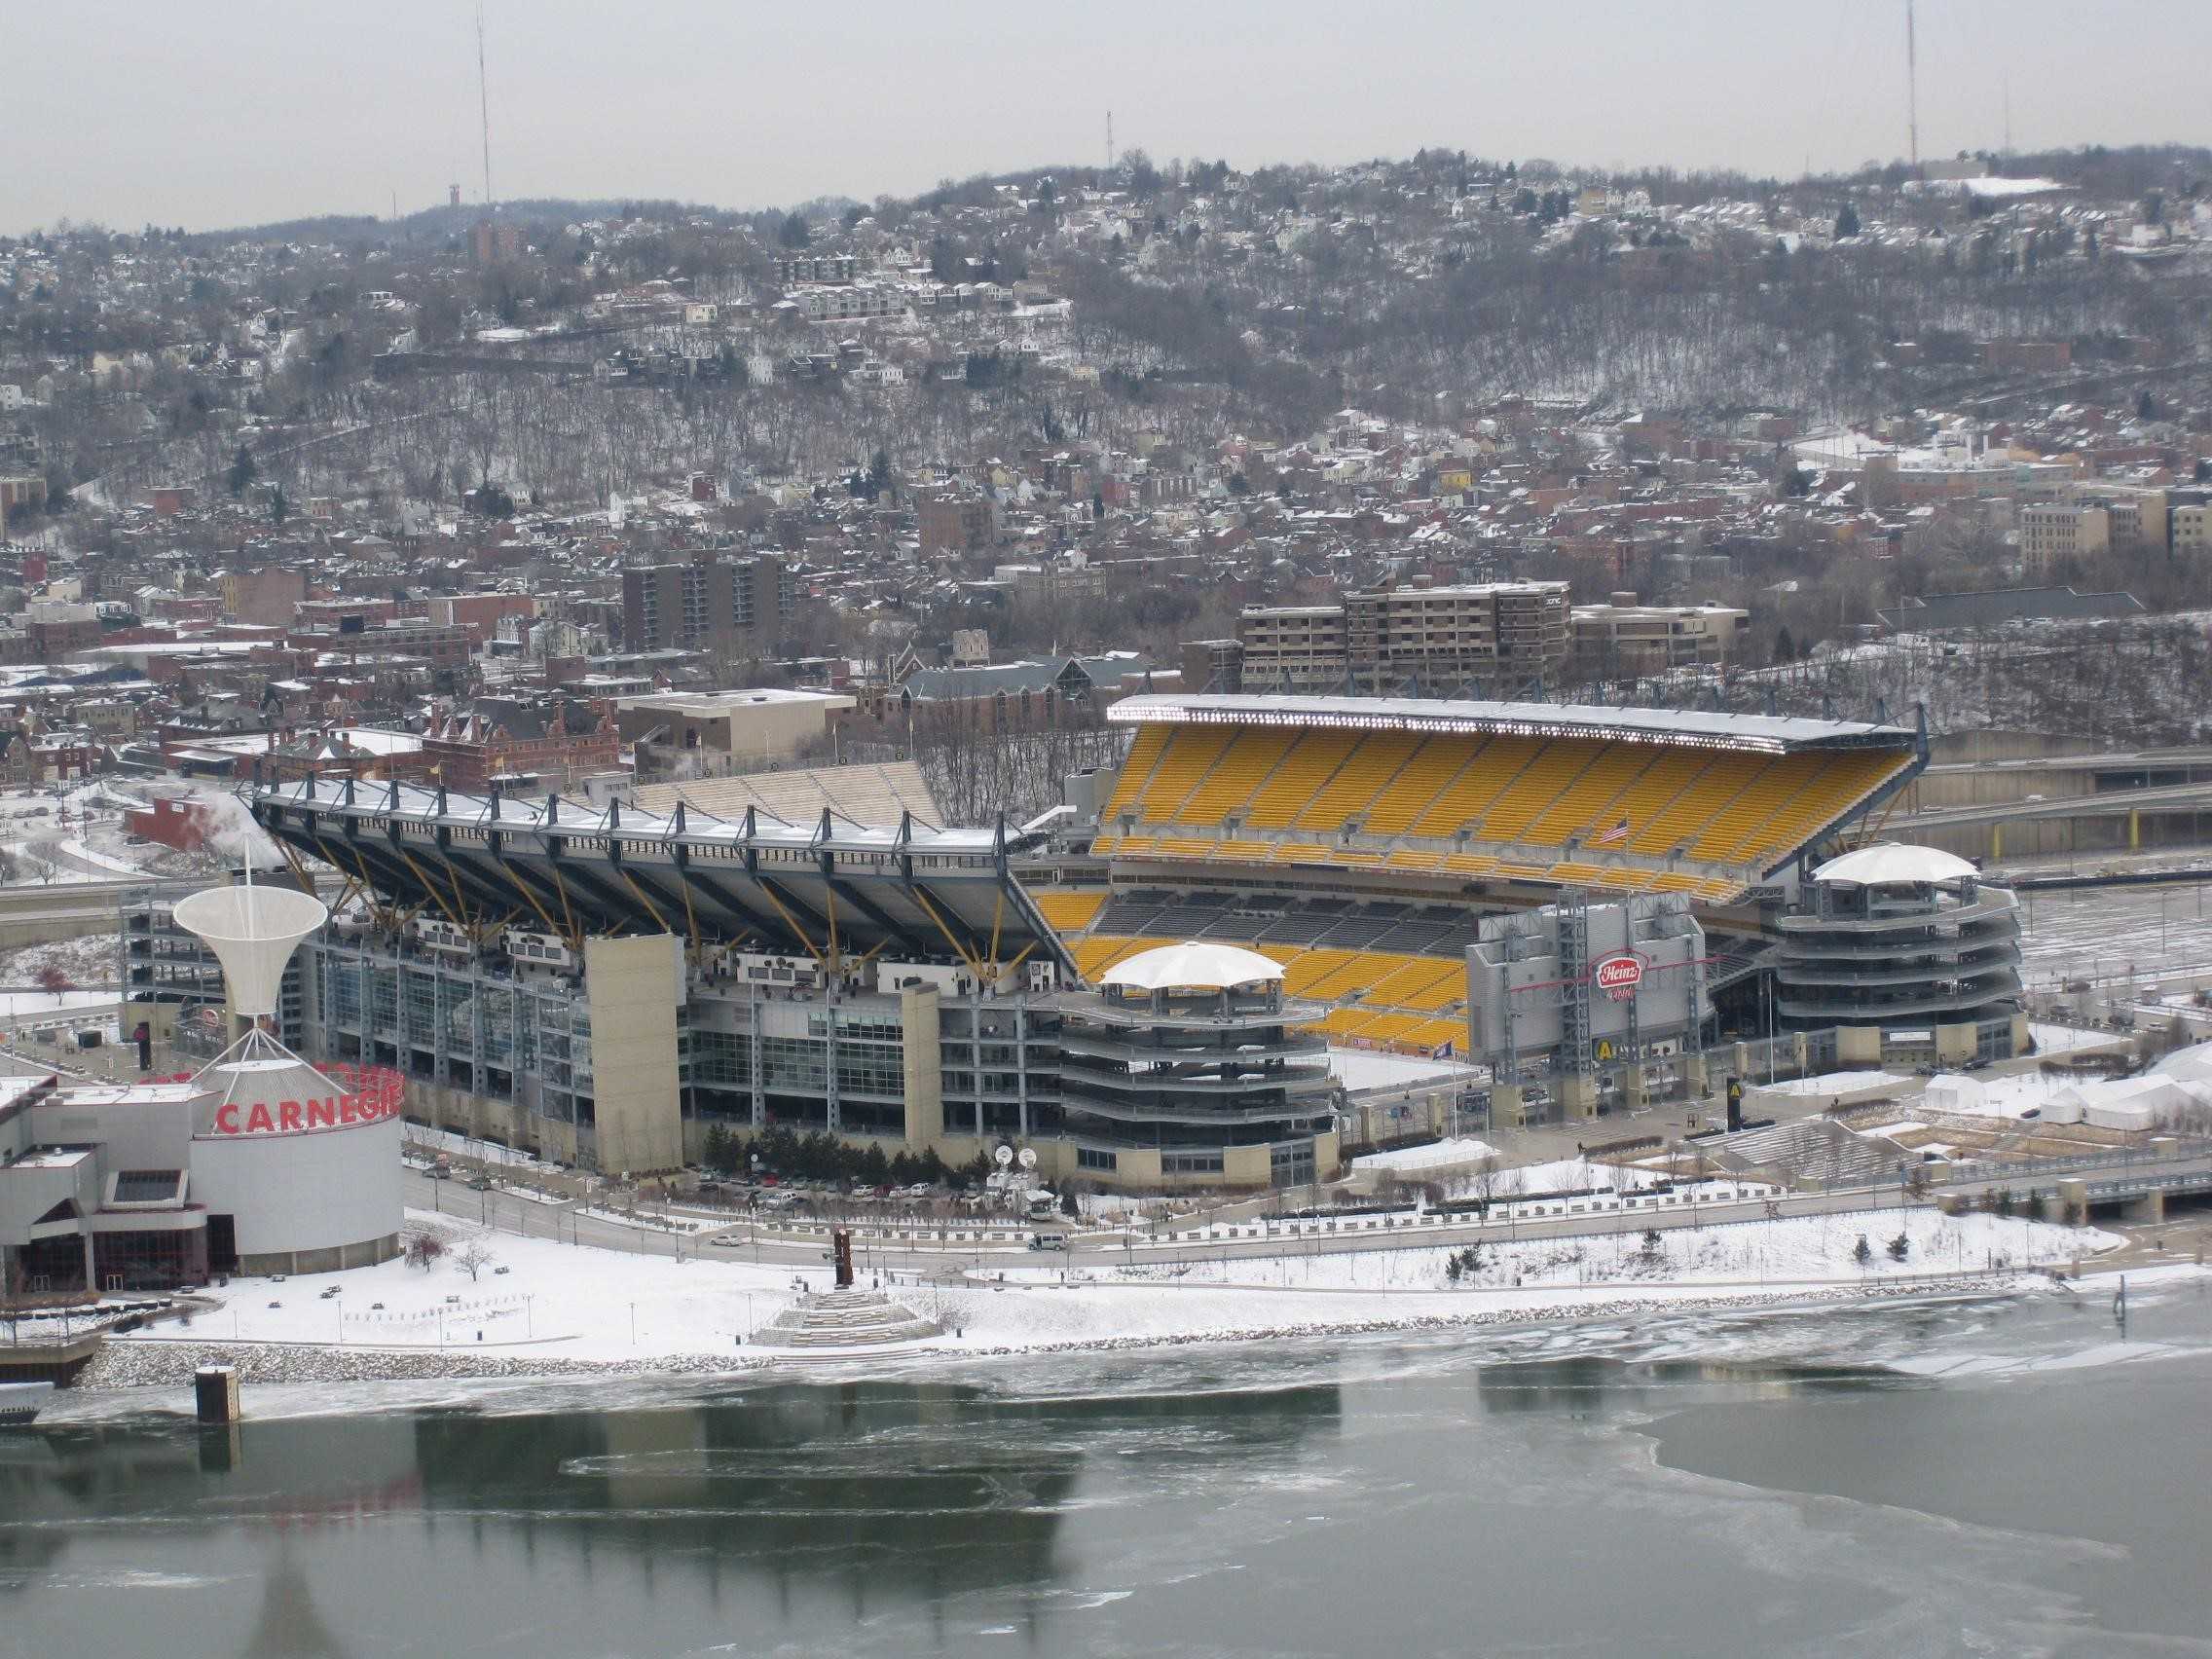 Heinz Field covered in a light snow, January 17 2009, davynin photographer, Wickemedia Commons. 